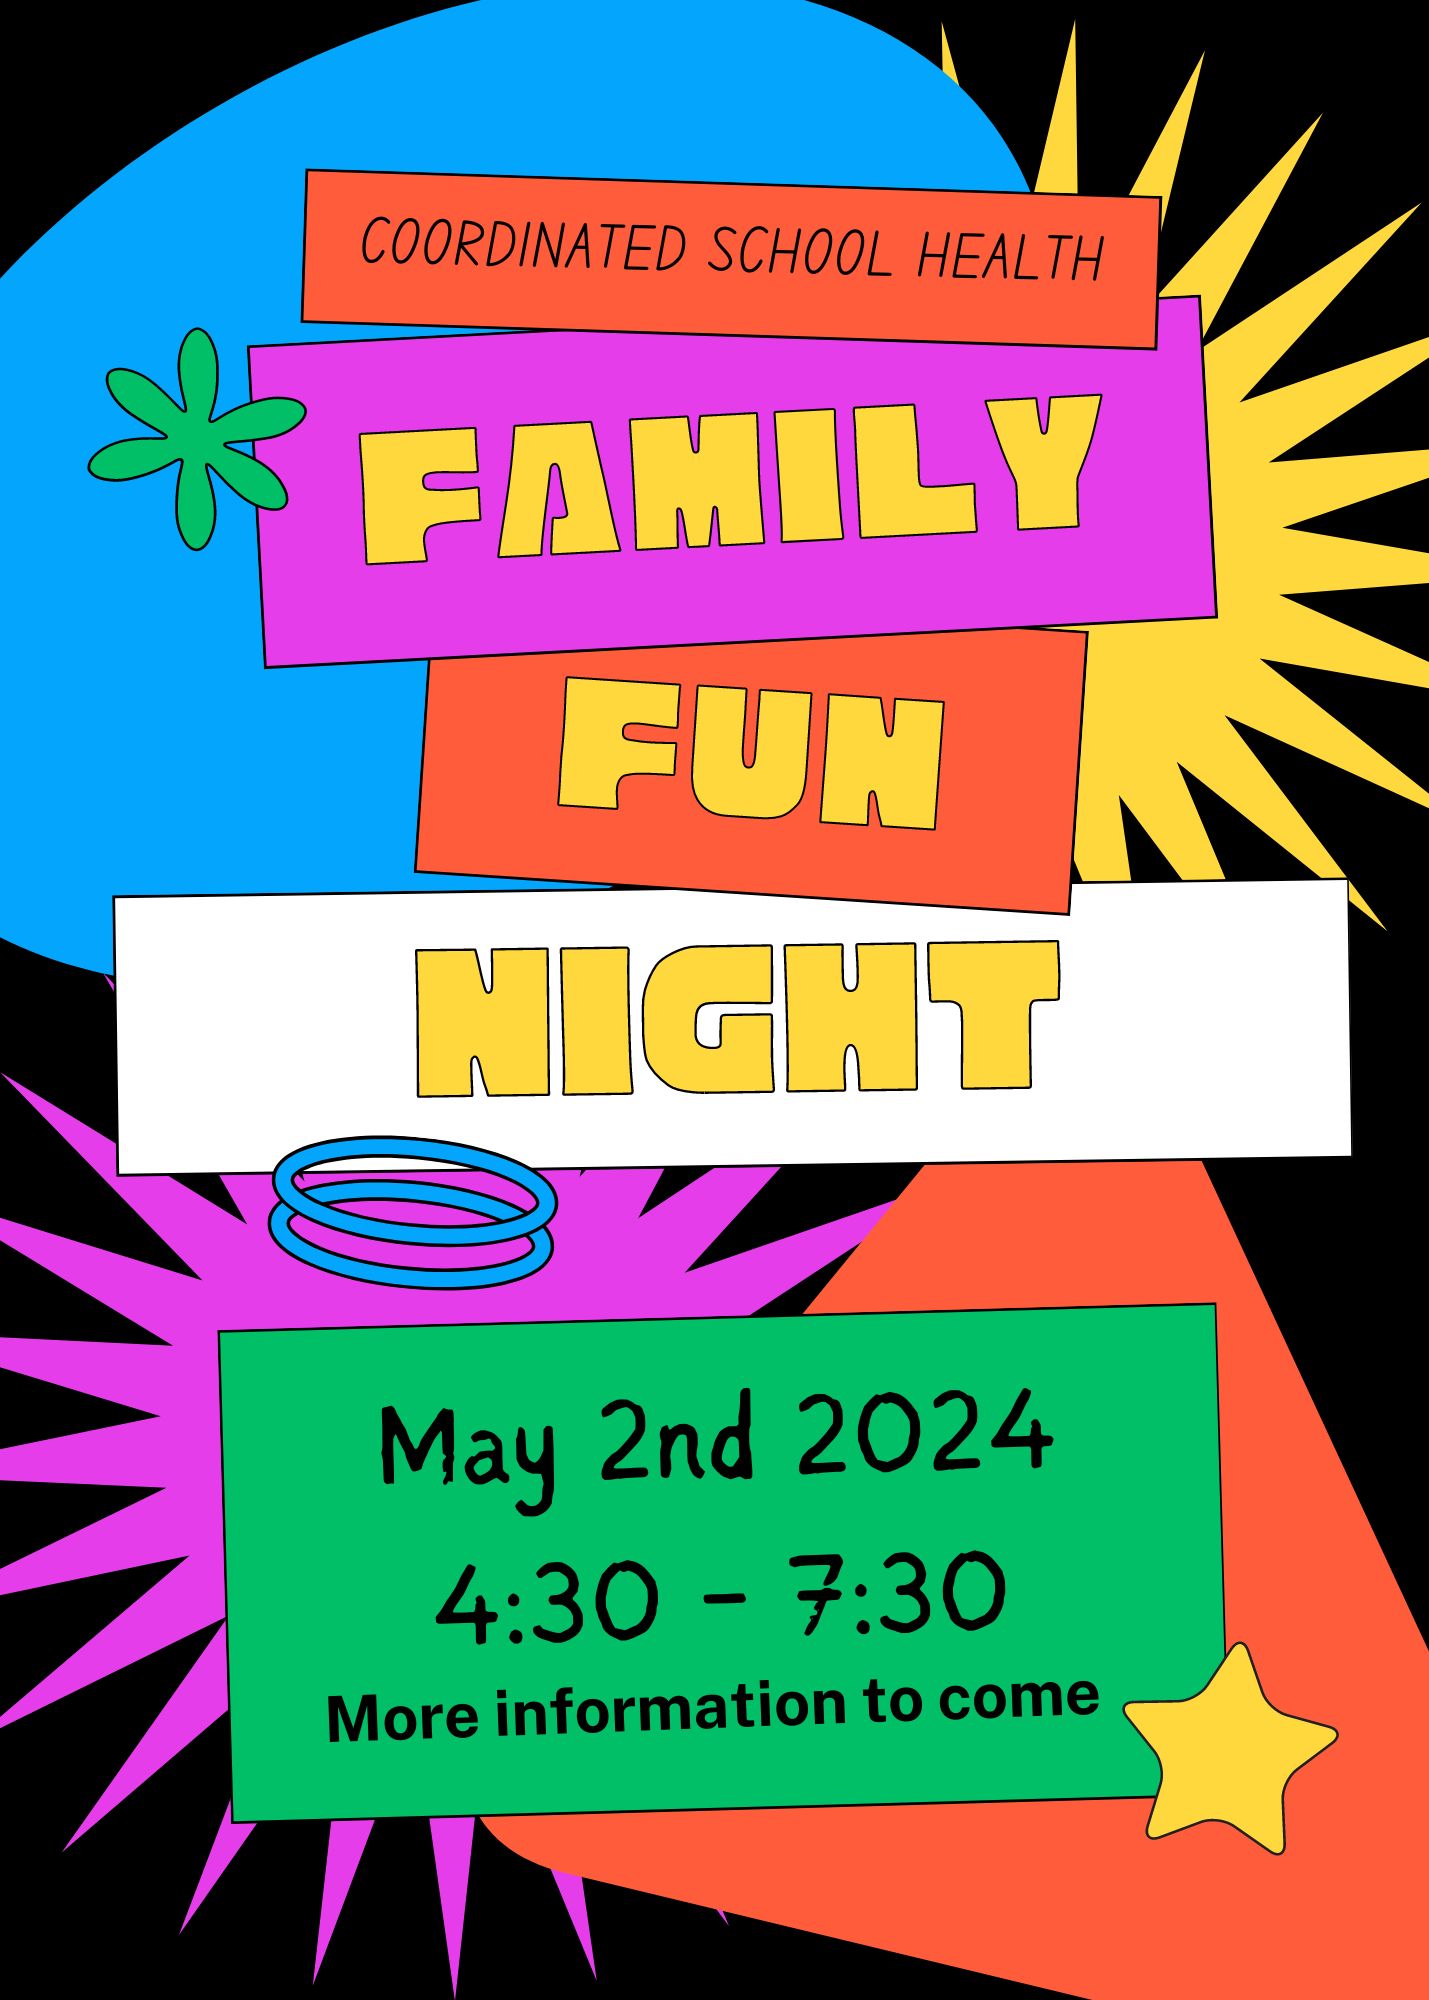 Coordinated school health family fun night May 2nd 2024 - more info to come